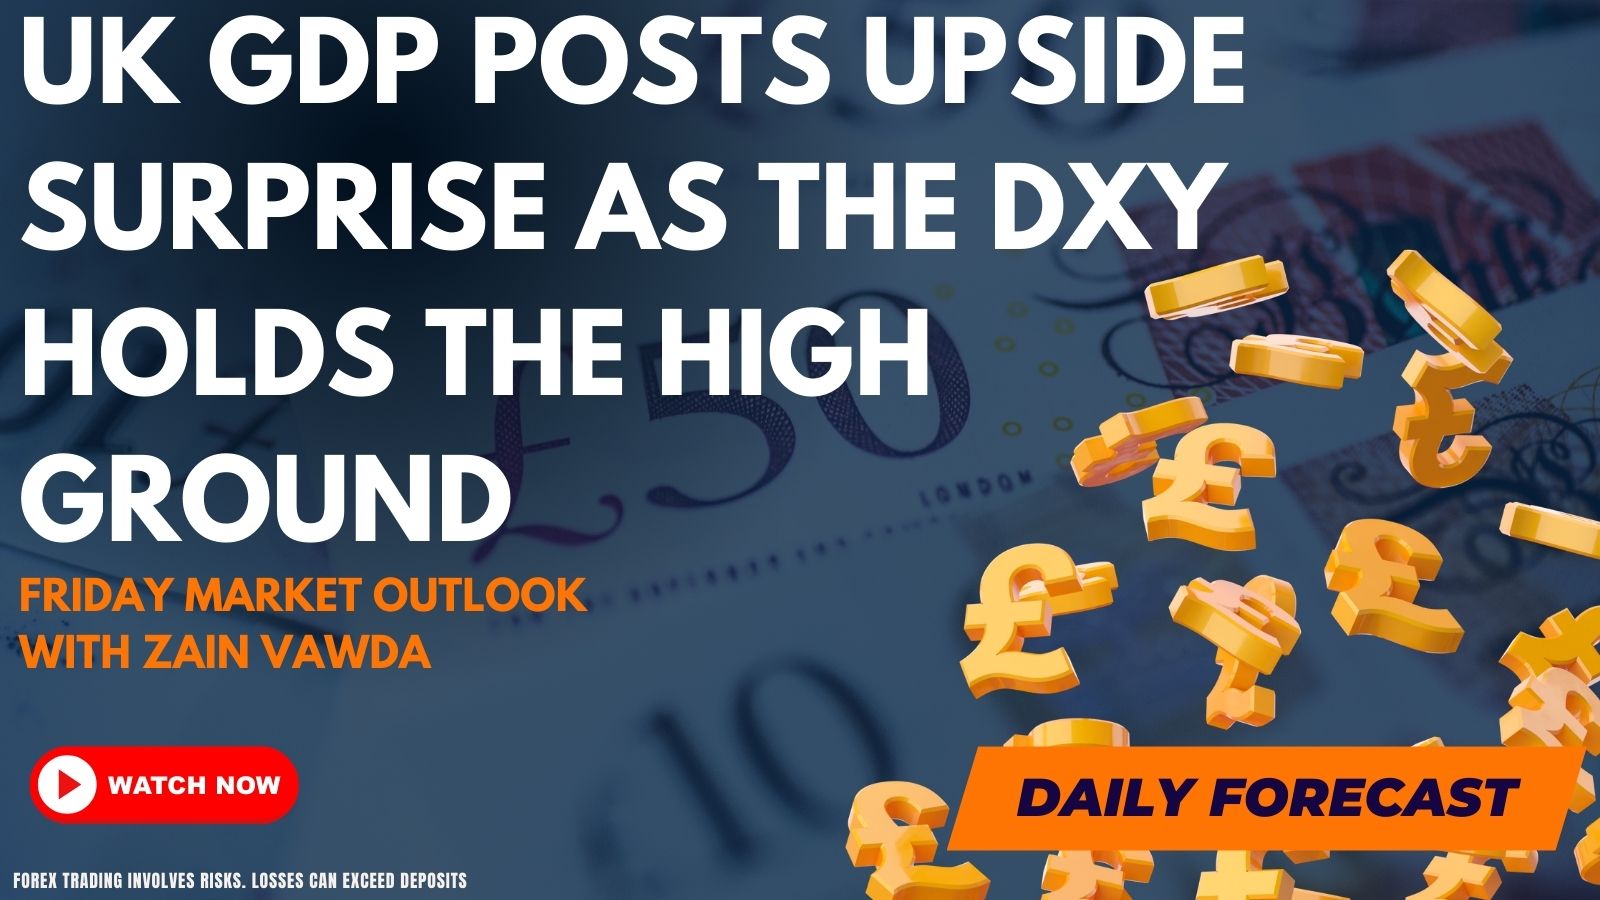 UK GDP Posts Upside Surprise as the DXY Holds the High Ground